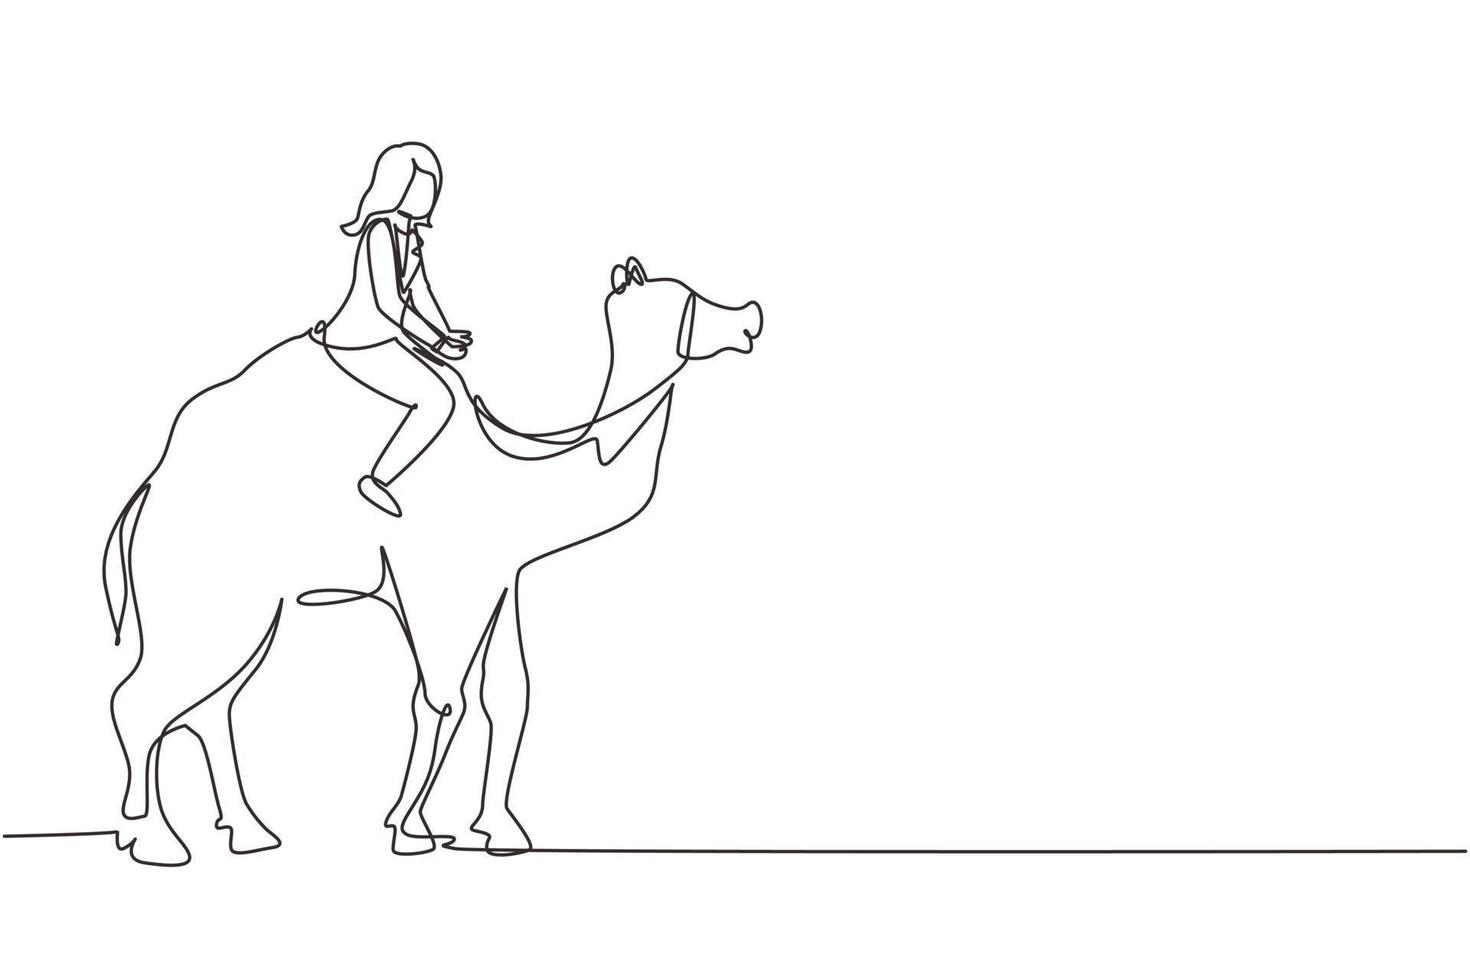 Continuous one line drawing Arabian businesswoman riding camel. Investment, bullish stock market trading, rising bonds trend. Successful business woman trader. Single line draw design vector graphic